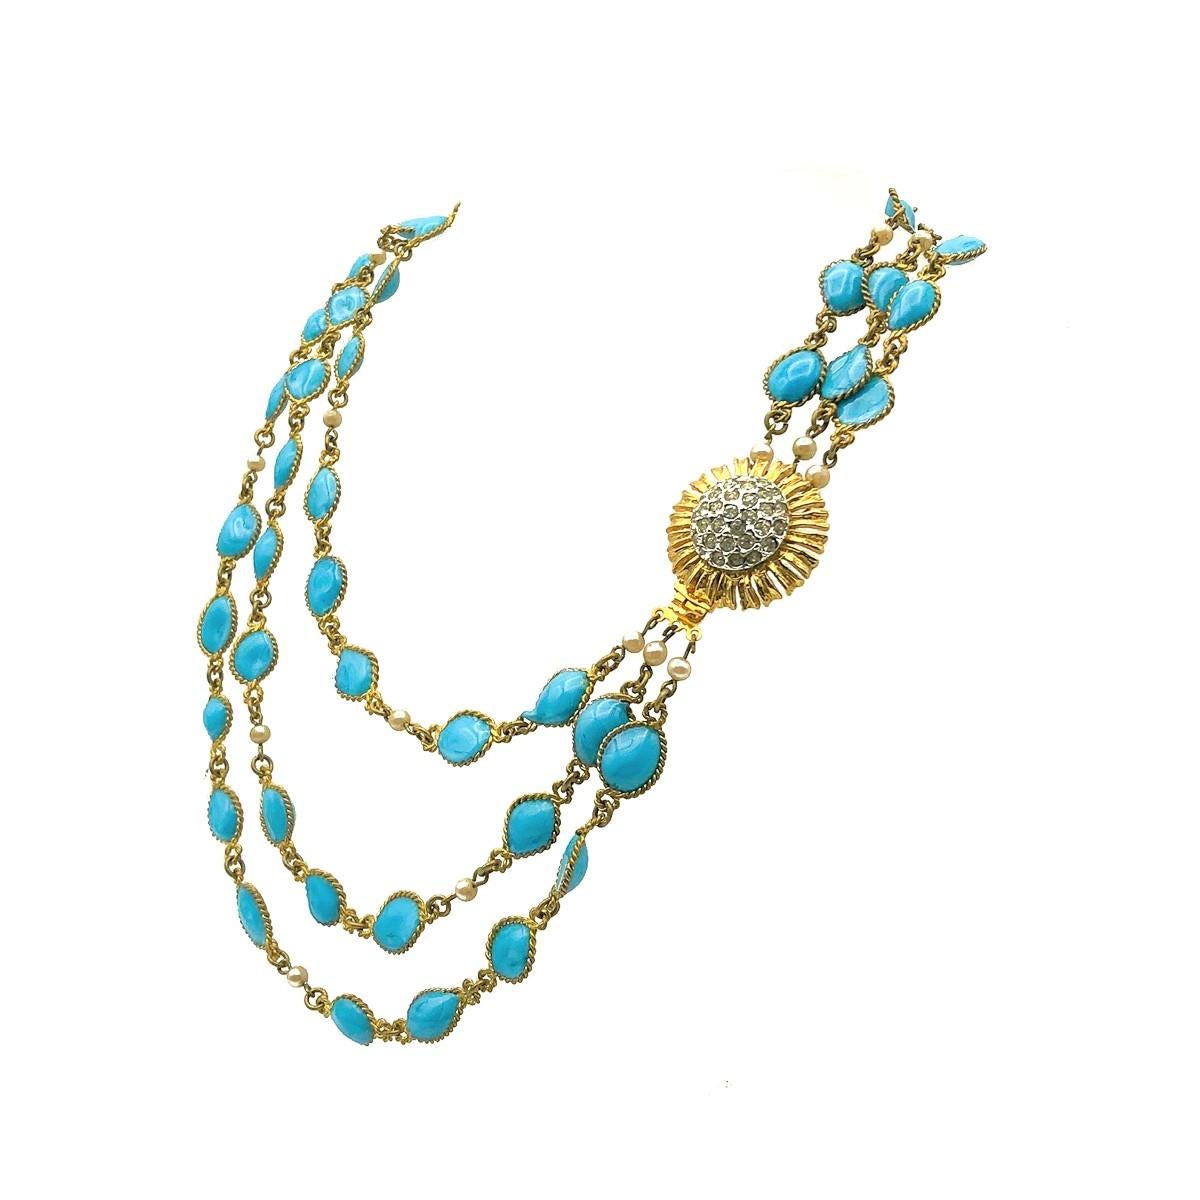 A strikingly beautiful handmade Vintage Gripoix Turquoise Necklace. Crafted by the House of Gripoix most likely in the late 1950s-early 1960s. Quite possibly made for Chanel however unmarked. The legendary House of Gripoix played perhaps the